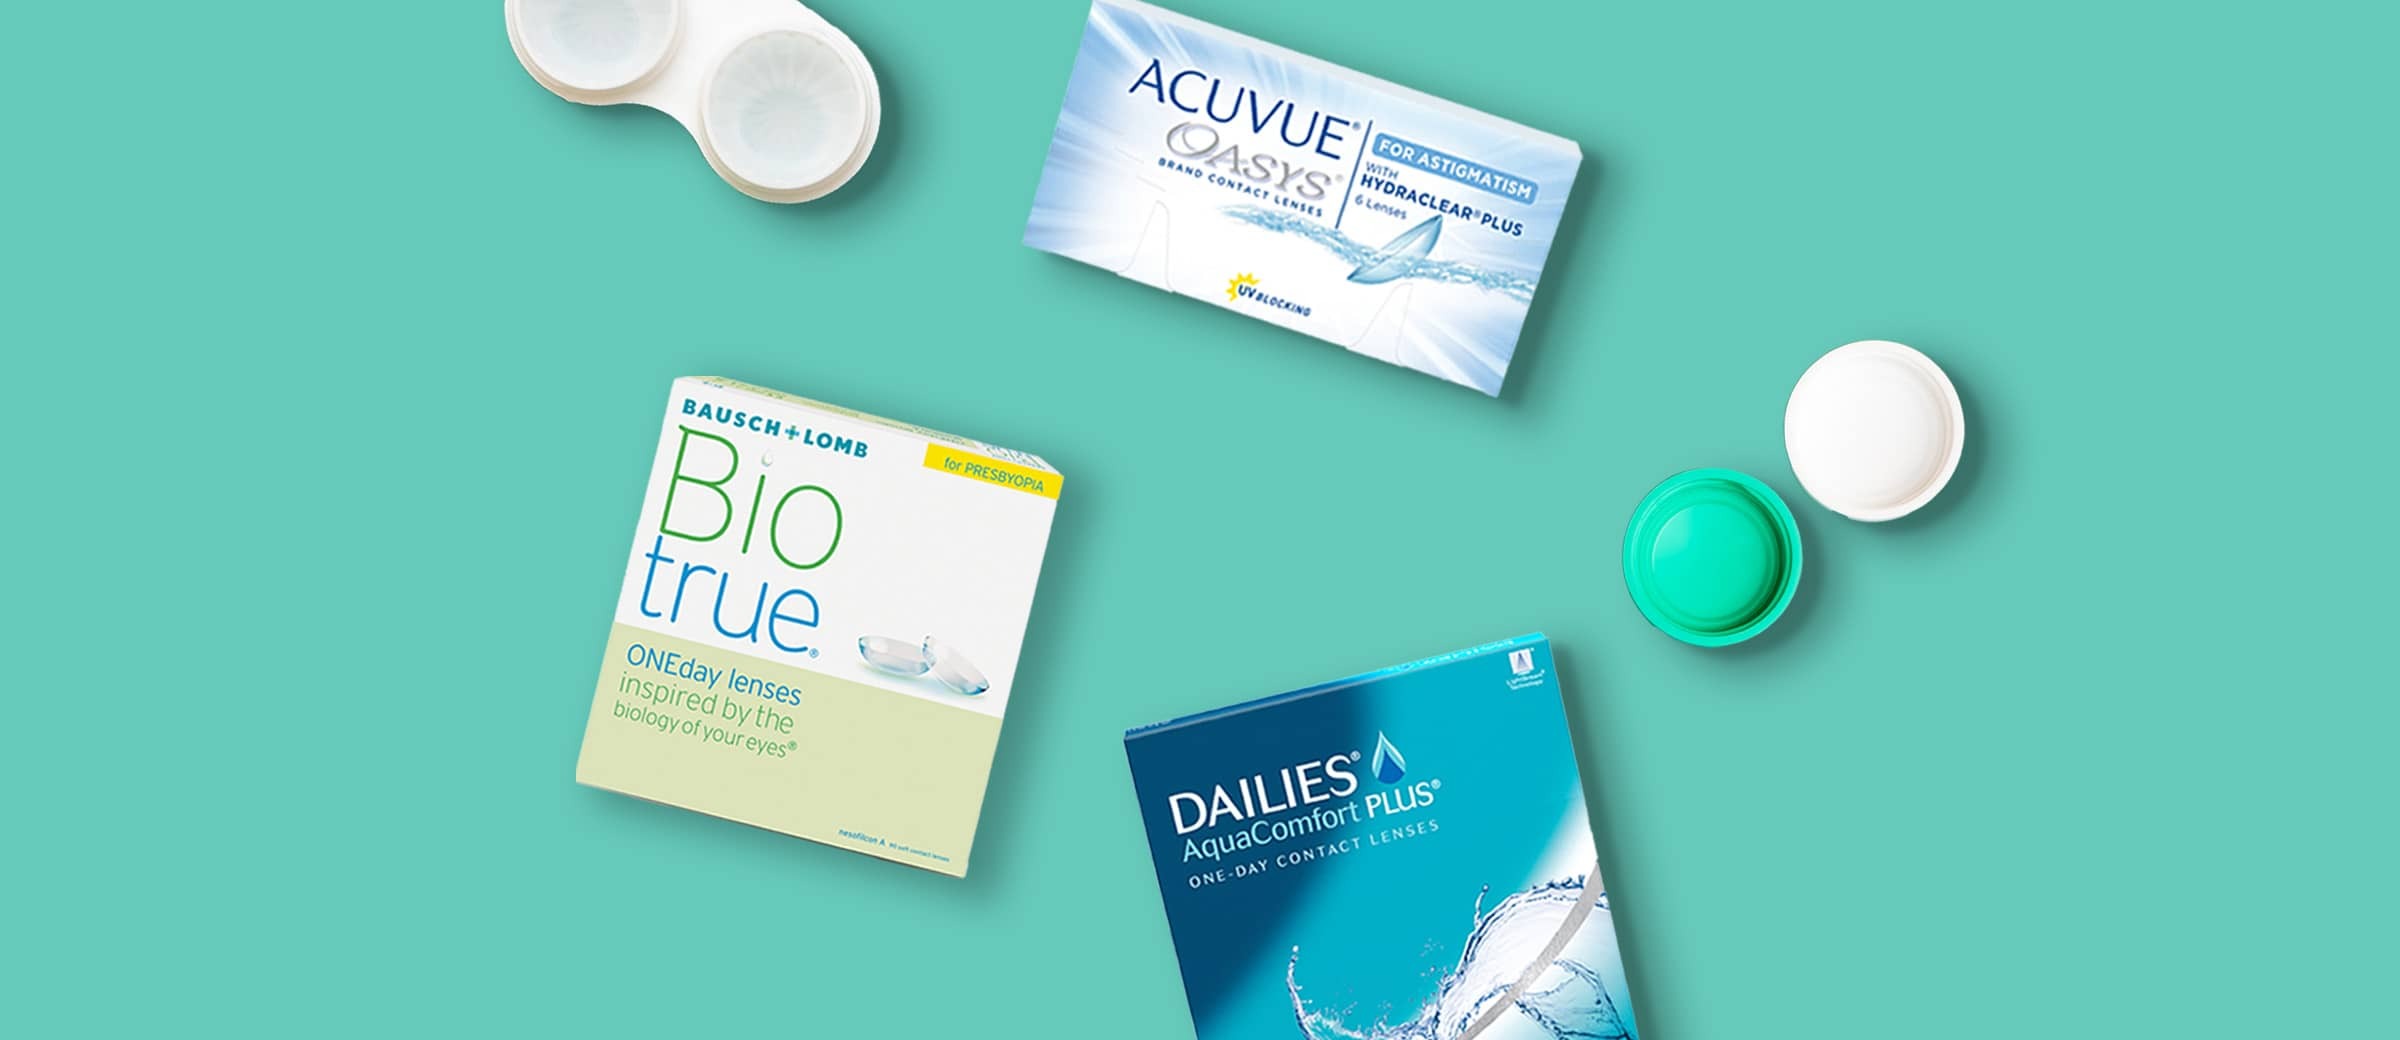 Contact lenses, Acuvue, Biotrue and Dailies brands shown